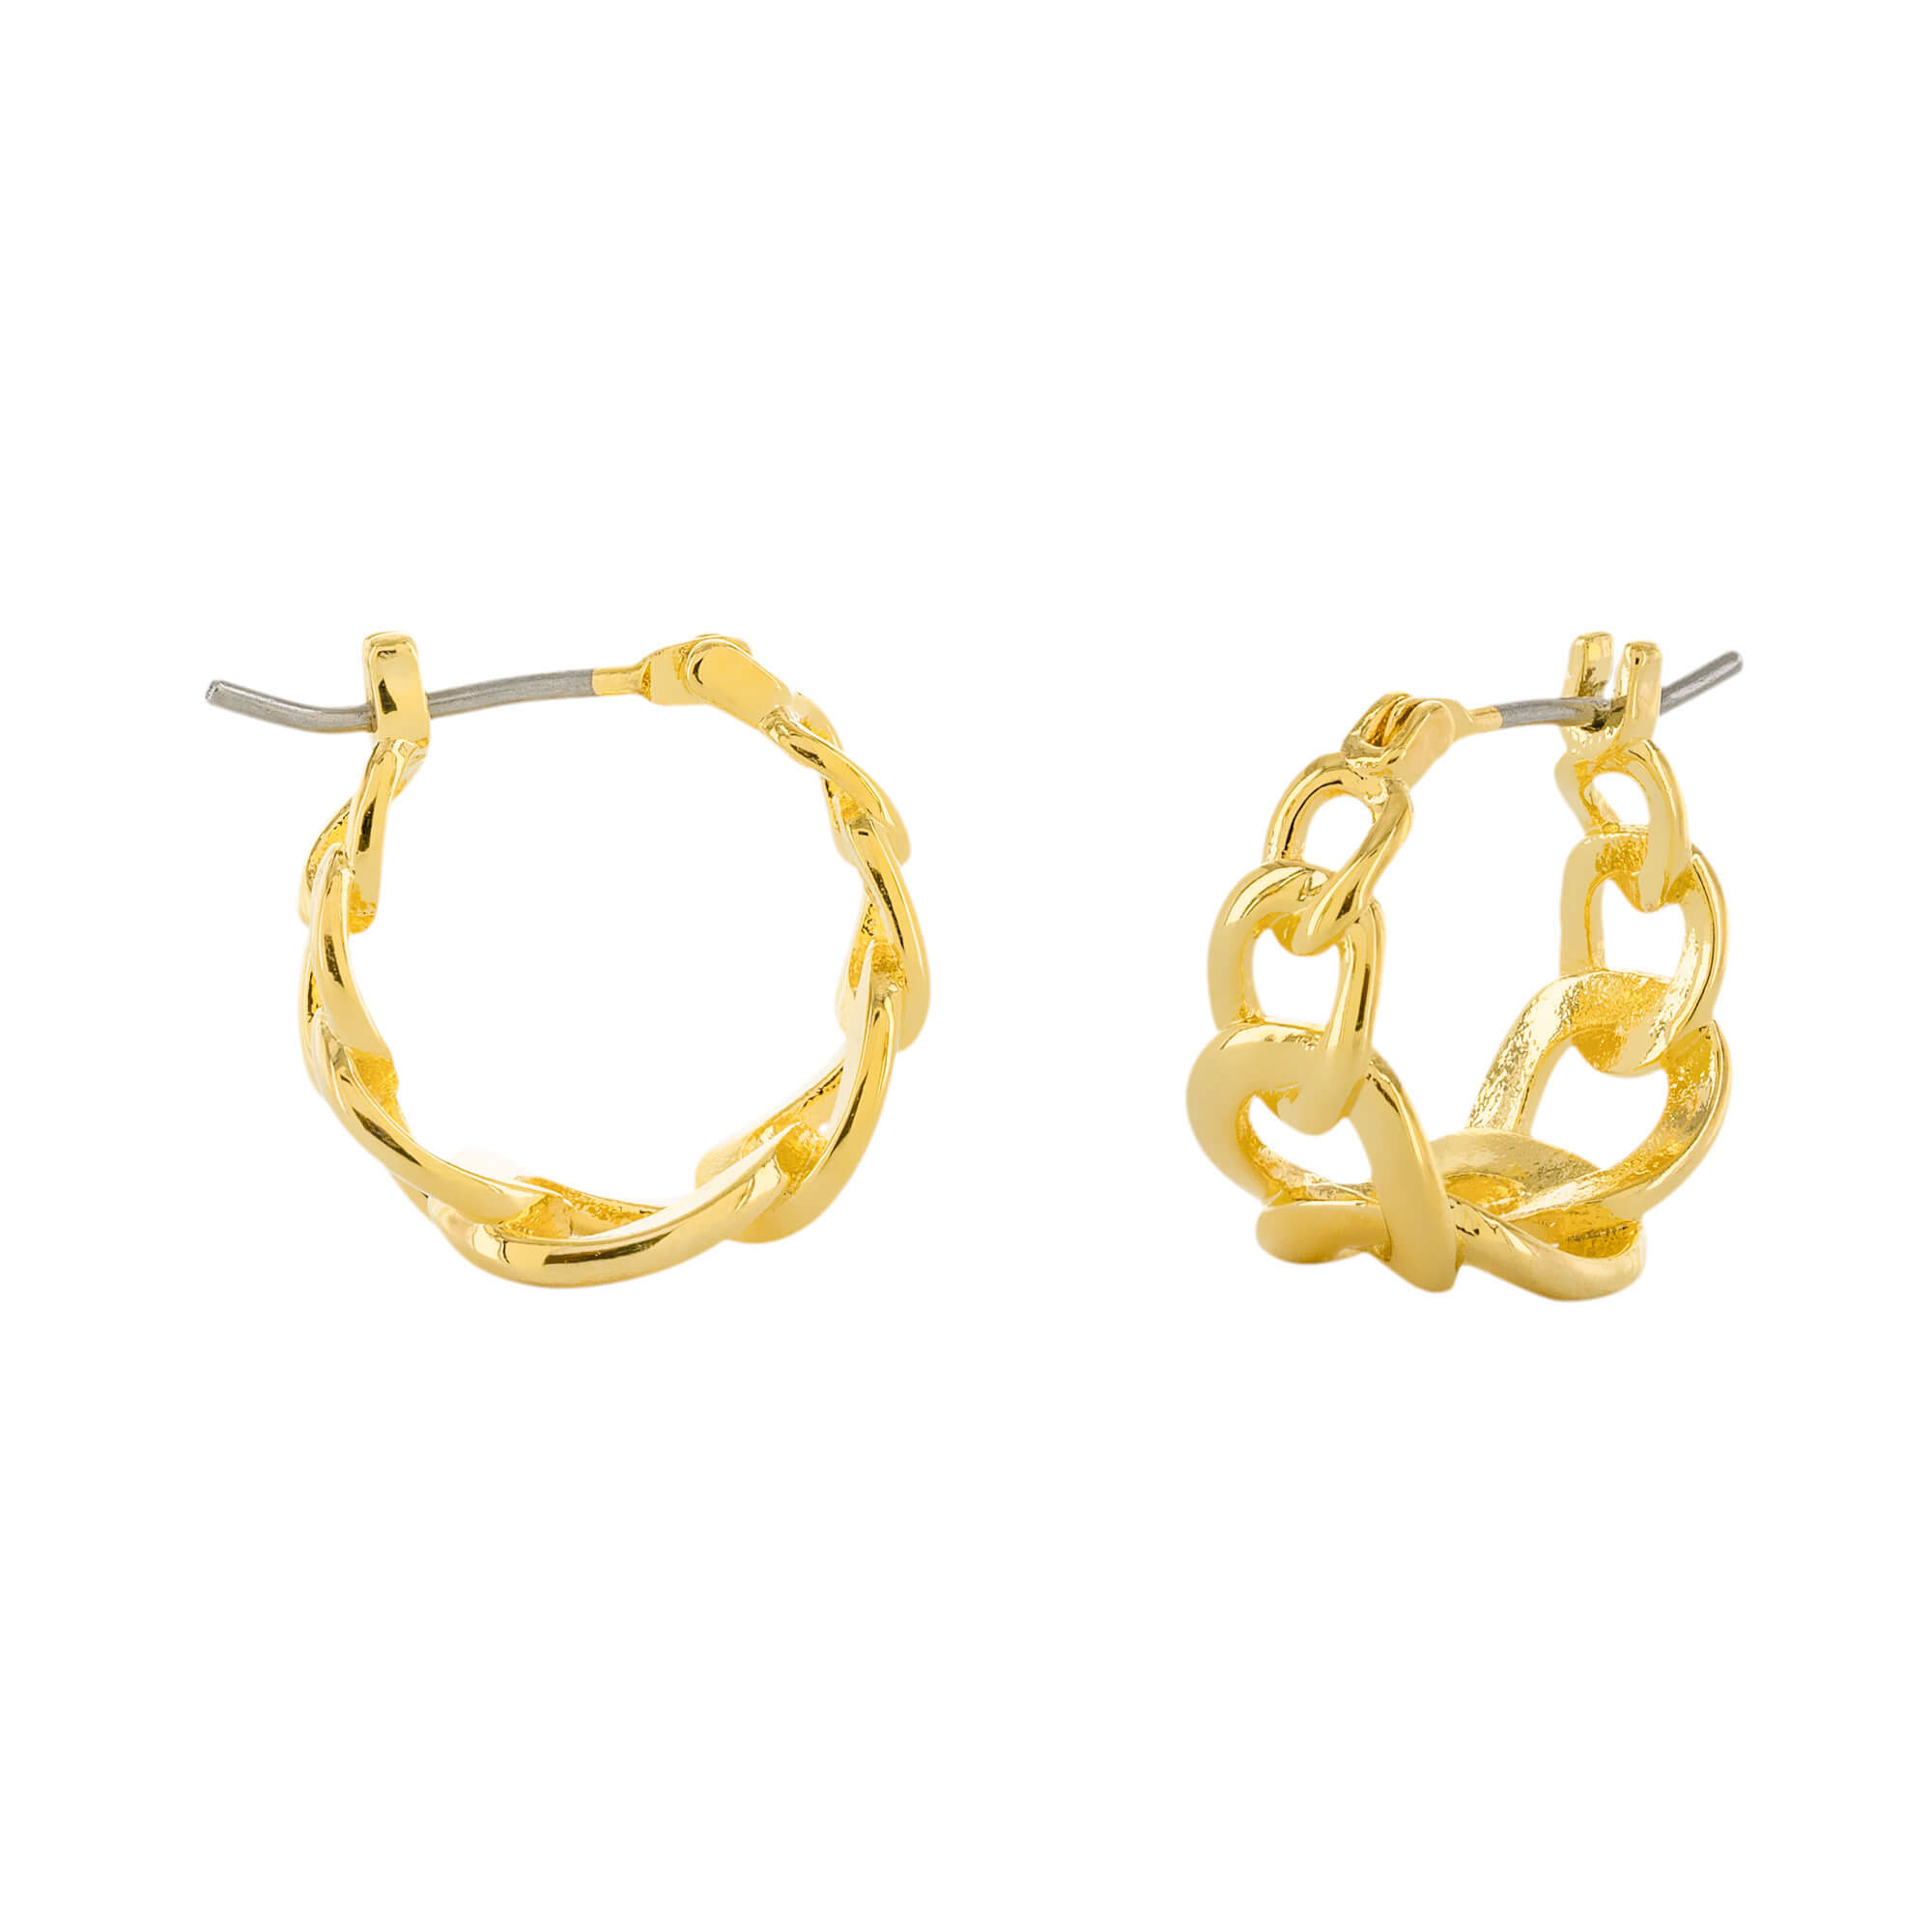 CURB LINK GOLD PLATED PIN CATCH EARRING